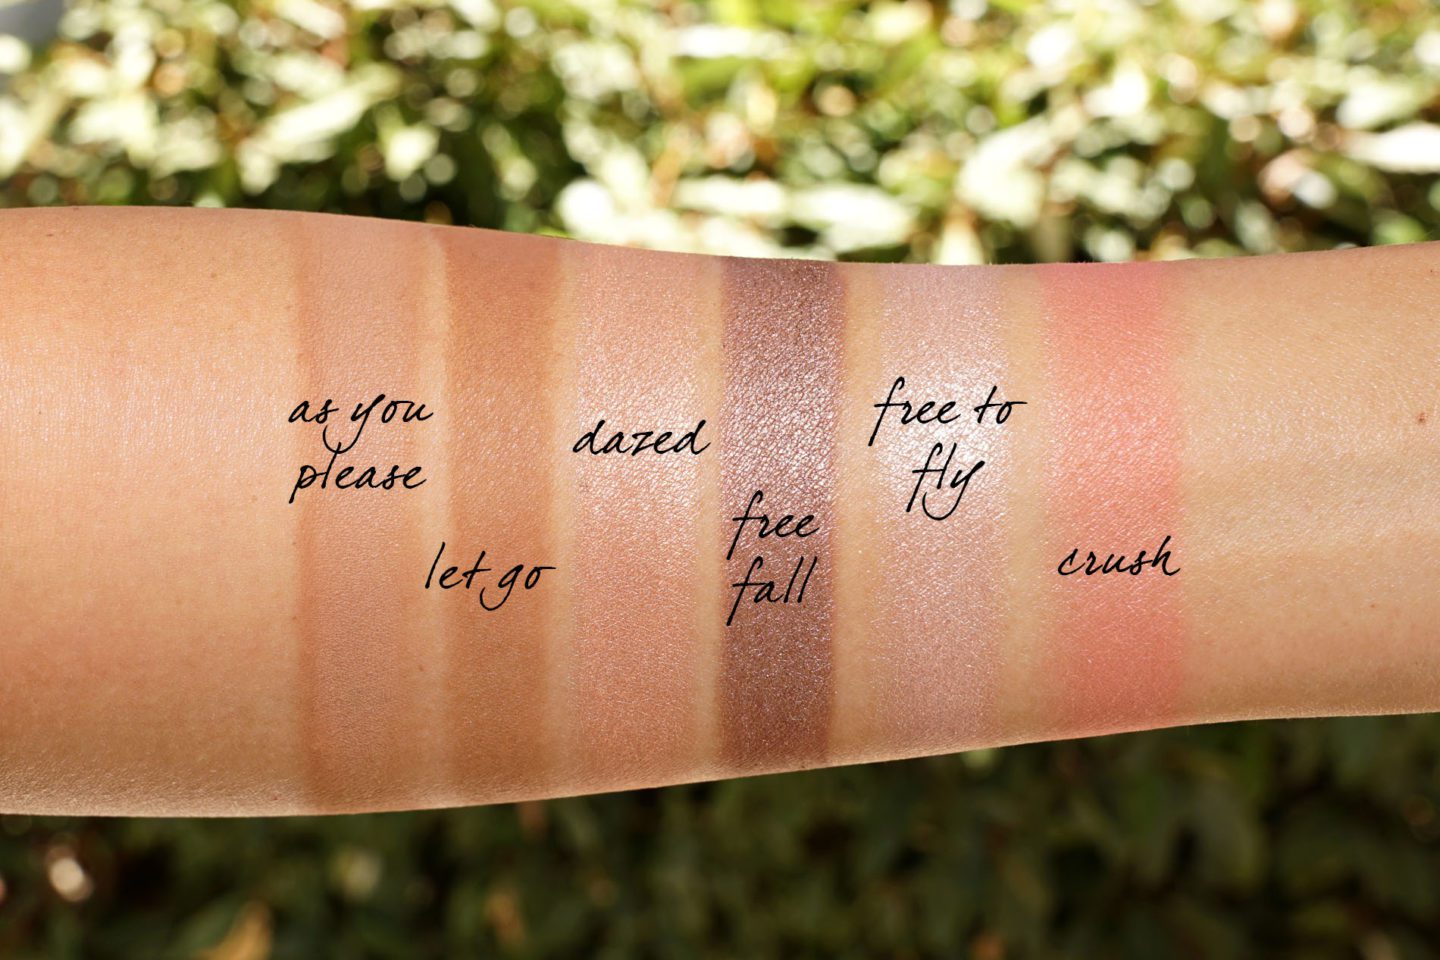 NARS Fever Dream Lost in Luster Palette Swatches